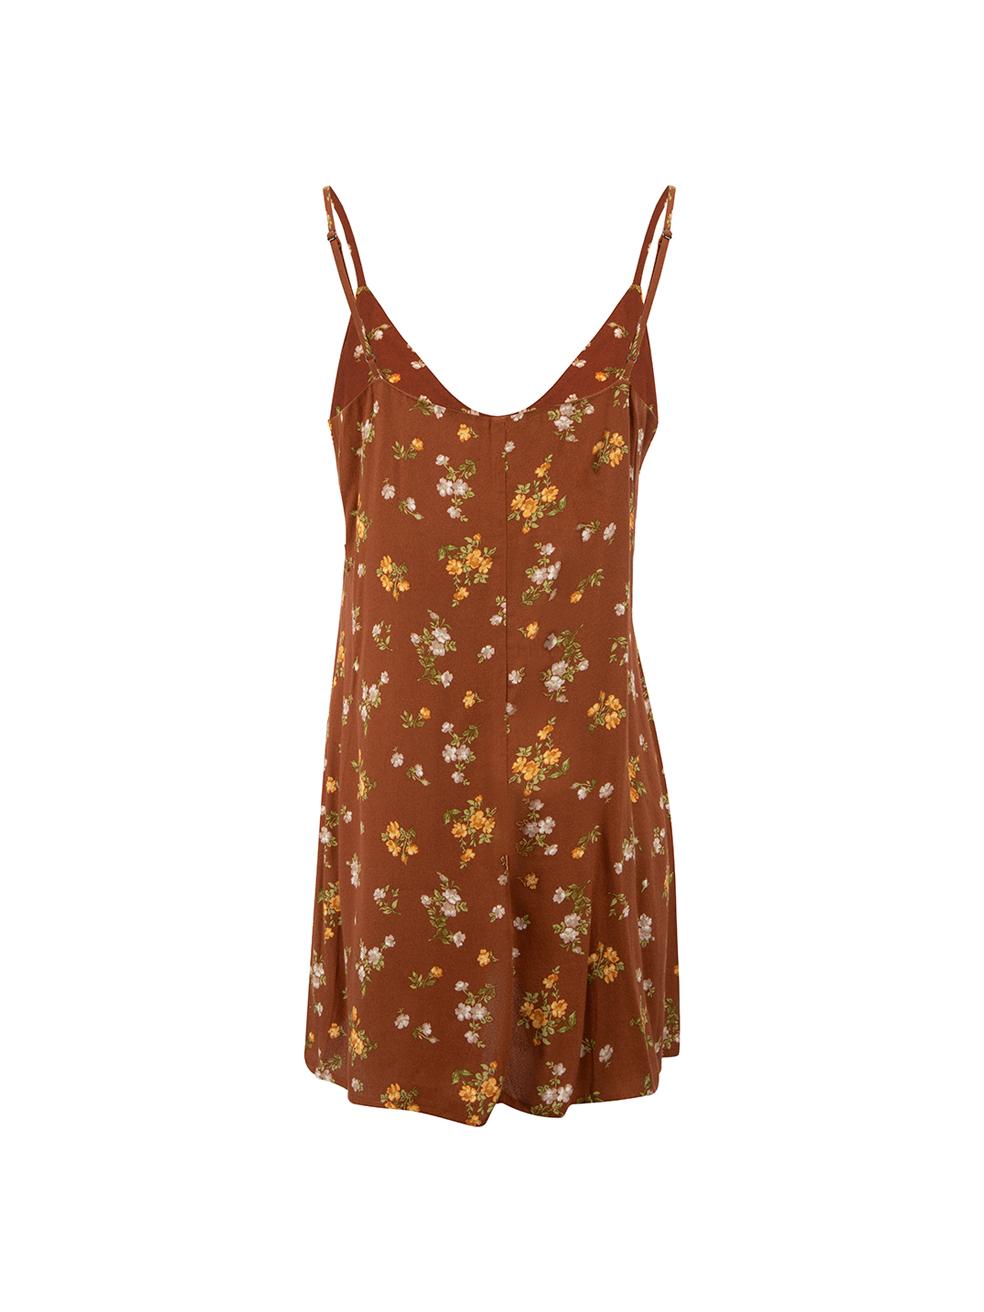 Reformation Brown Floral Sleeveless Mini Dress Size M In Excellent Condition For Sale In London, GB